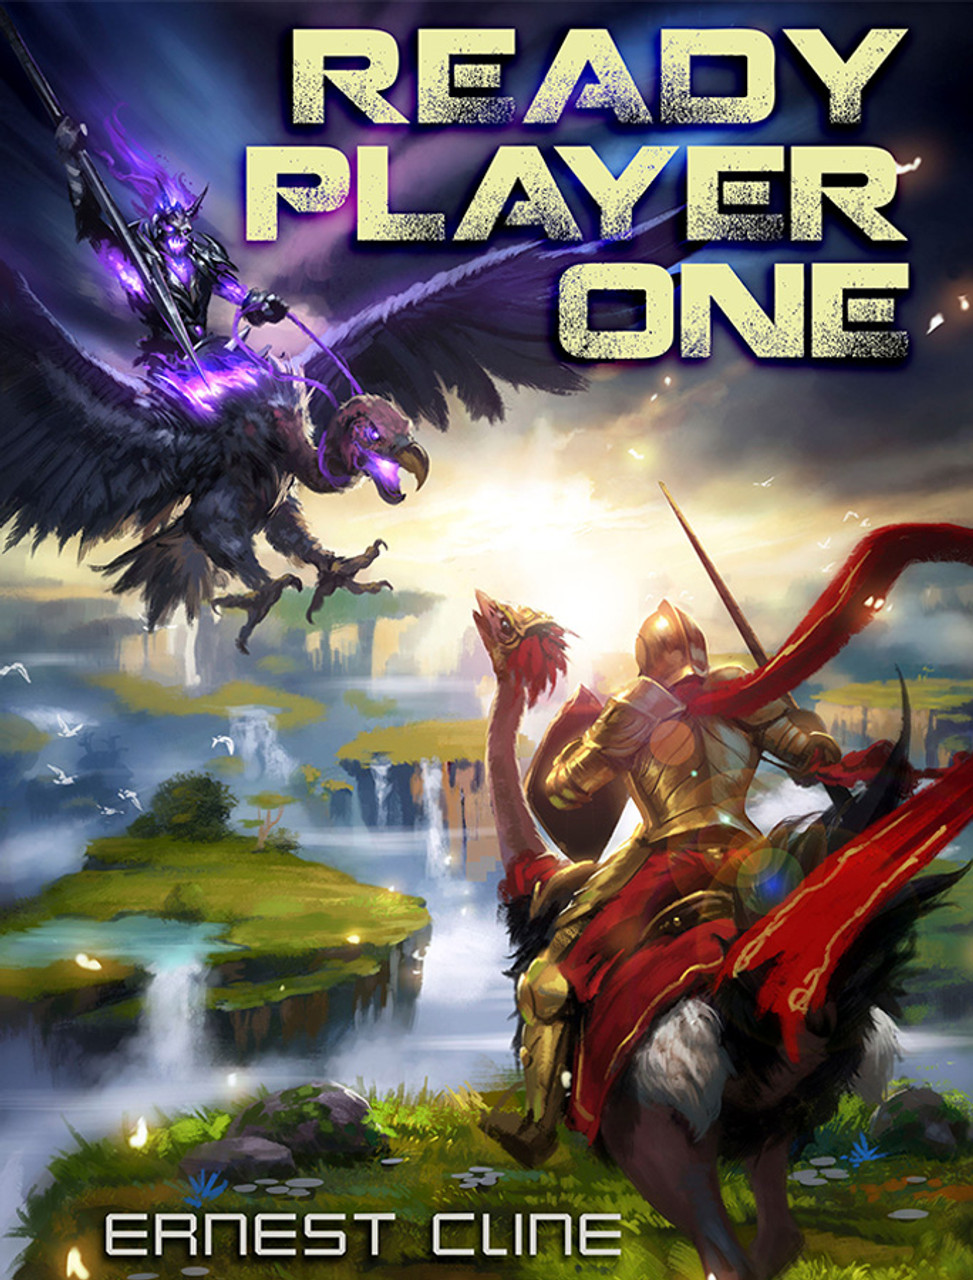 Book notes: Ready Player One by Ernest Cline – Marlo Yonocruz